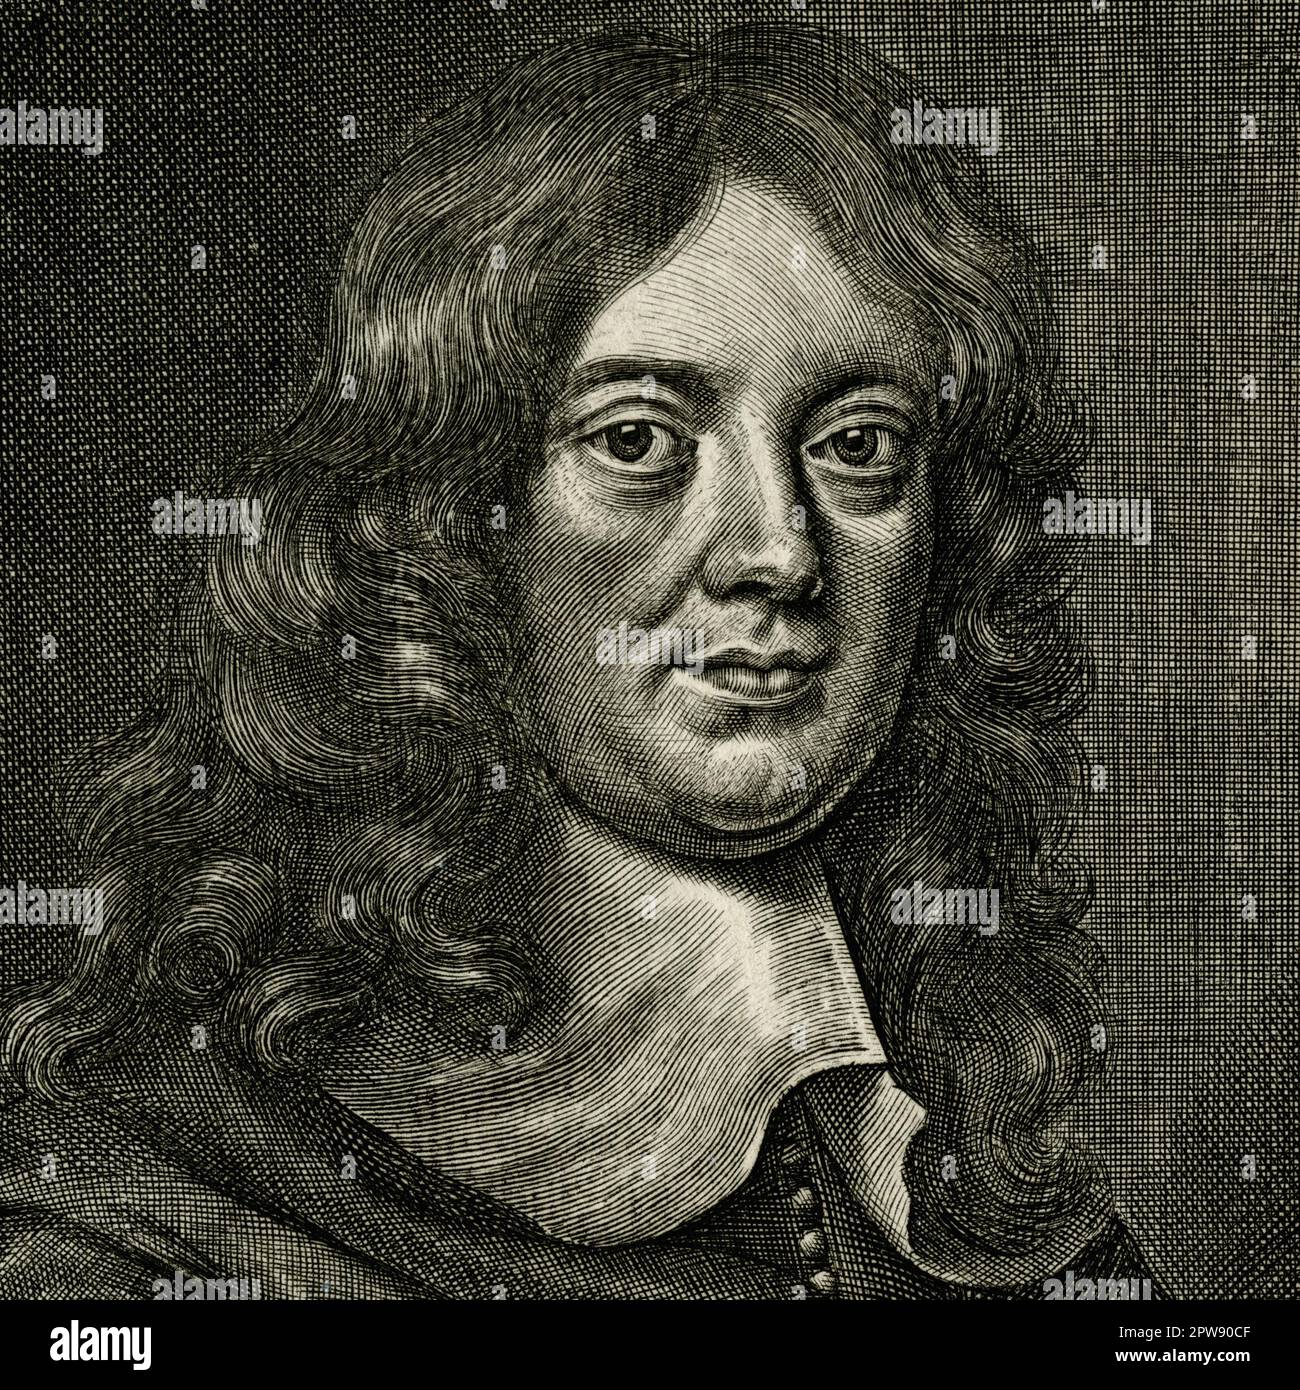 Abraham Cowley (1618-1667), English Cavalier poet, Royalist spy, Secretary to Queen Henrietta Maria and co-founder of the Royal Society. Square detail of engraving by English antiquarian and engraver, William Faithorne the Elder (1616-1691), after an original portrait by Mary Beale (1632-1697) or Sir Peter Lely (1618-1680). This engraving was first published in 1687. Stock Photo